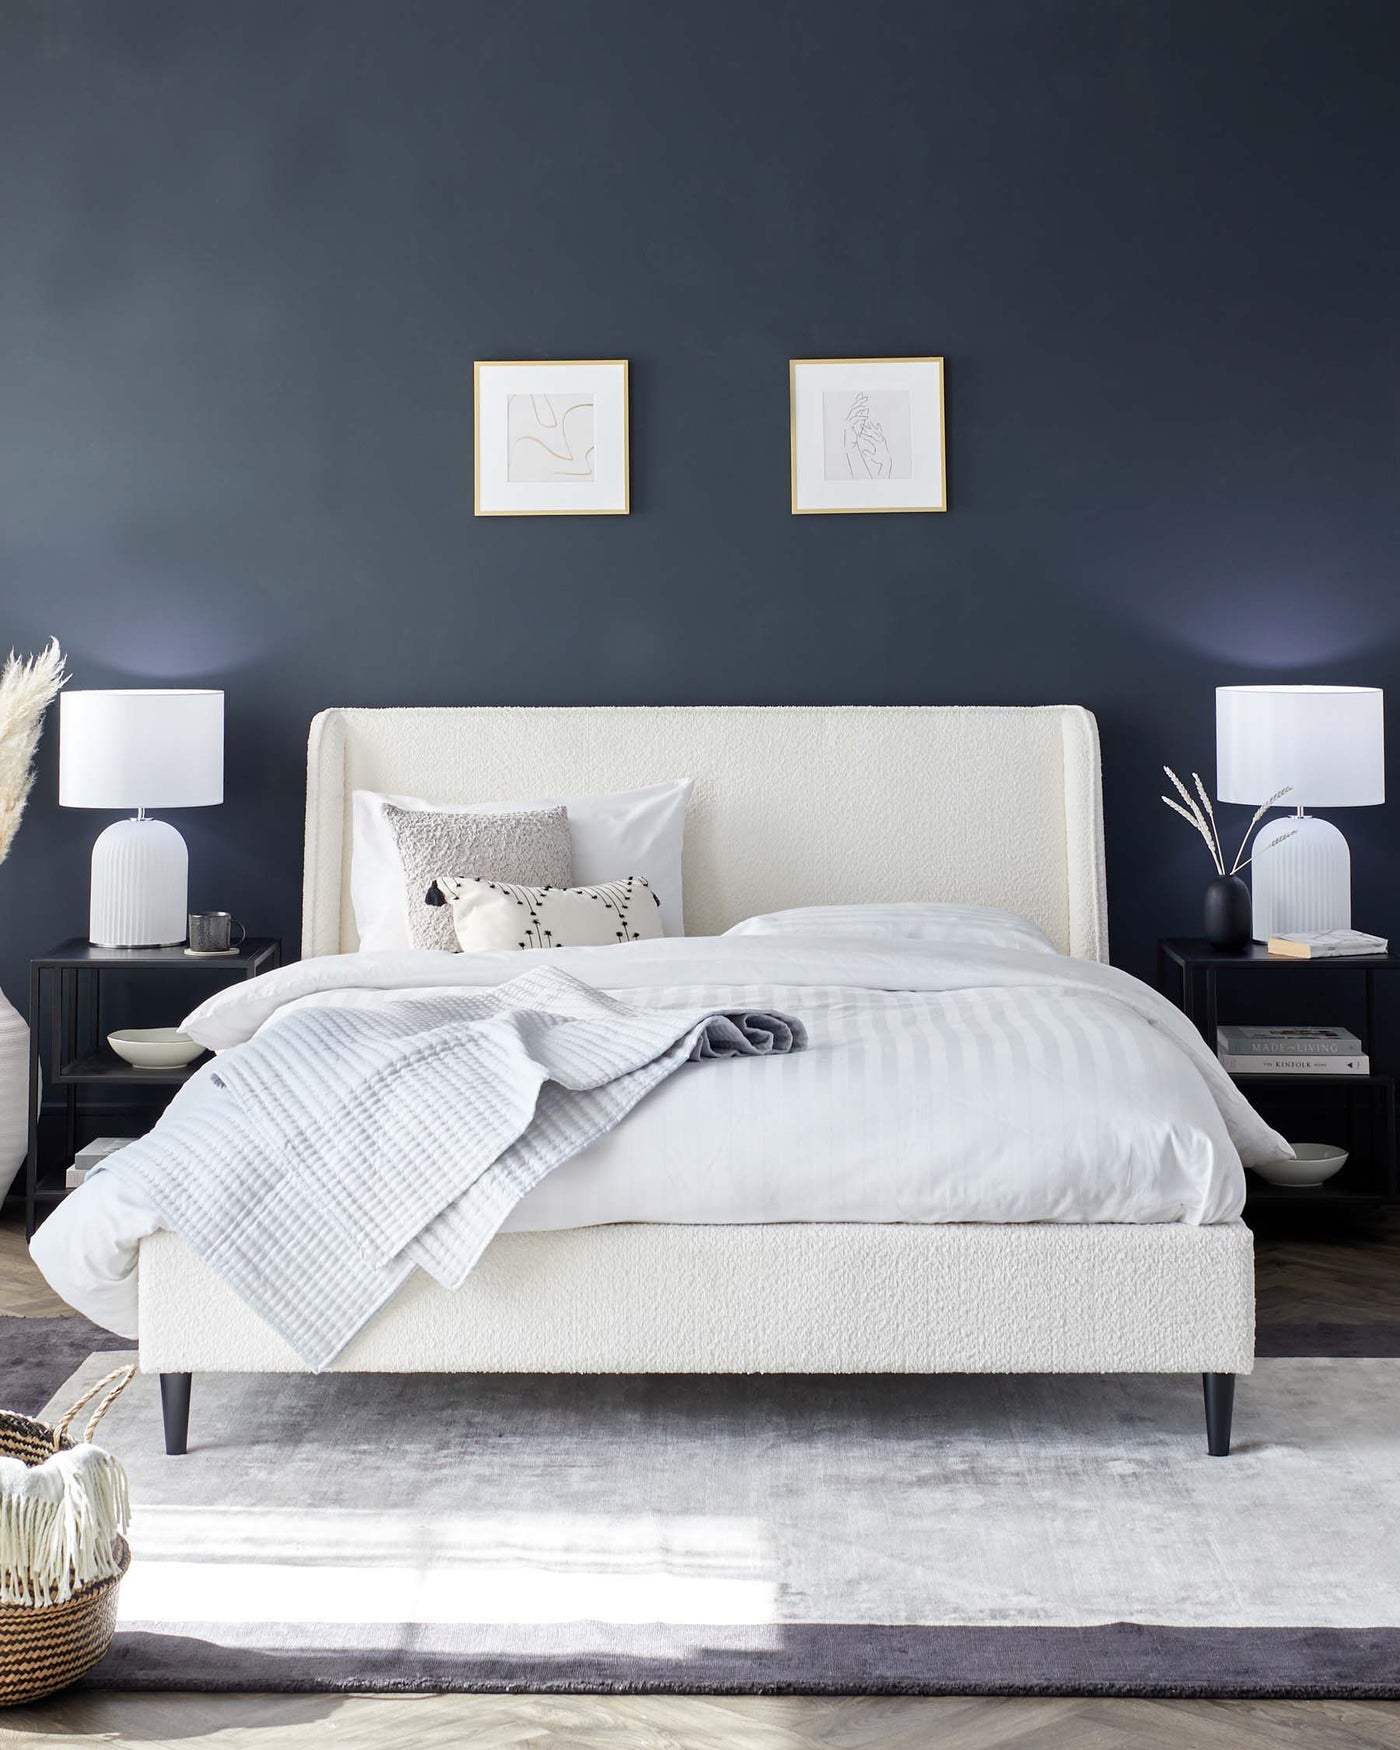 Elegant bedroom furniture set including an upholstered queen-sized bed in a creamy-white fabric with a high headboard and dark tapered legs. Accompanying the bed are two matching nightstands in black, featuring minimalist design, each with two drawers topped with white cylindrical table lamps and decorative items. A textured grey area rug lies beneath the bed, adding warmth and contrast to the light wooden flooring.